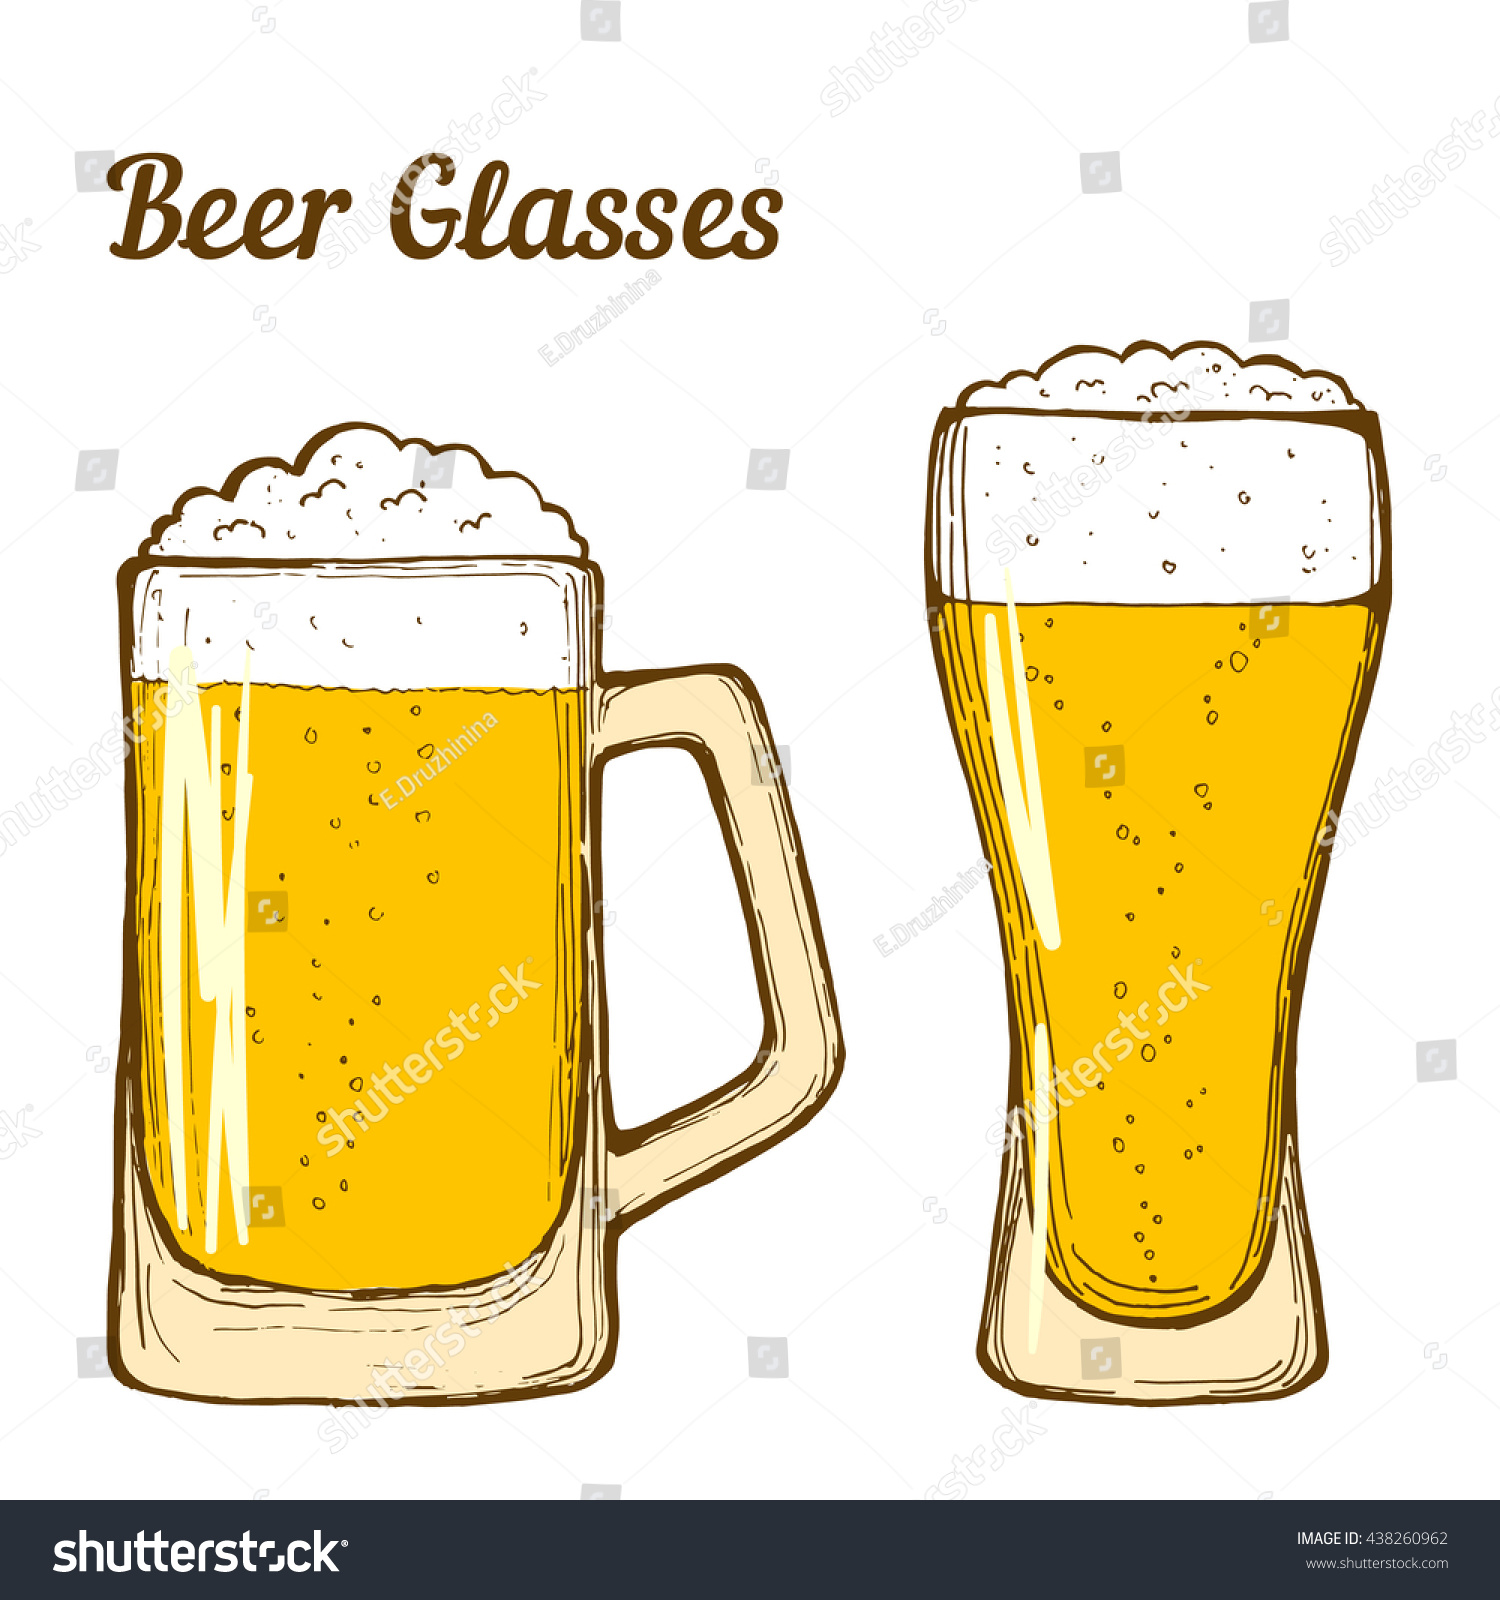 stock-photo-two-glasses-of-beer-hand-drawing-color-438260962.jpg